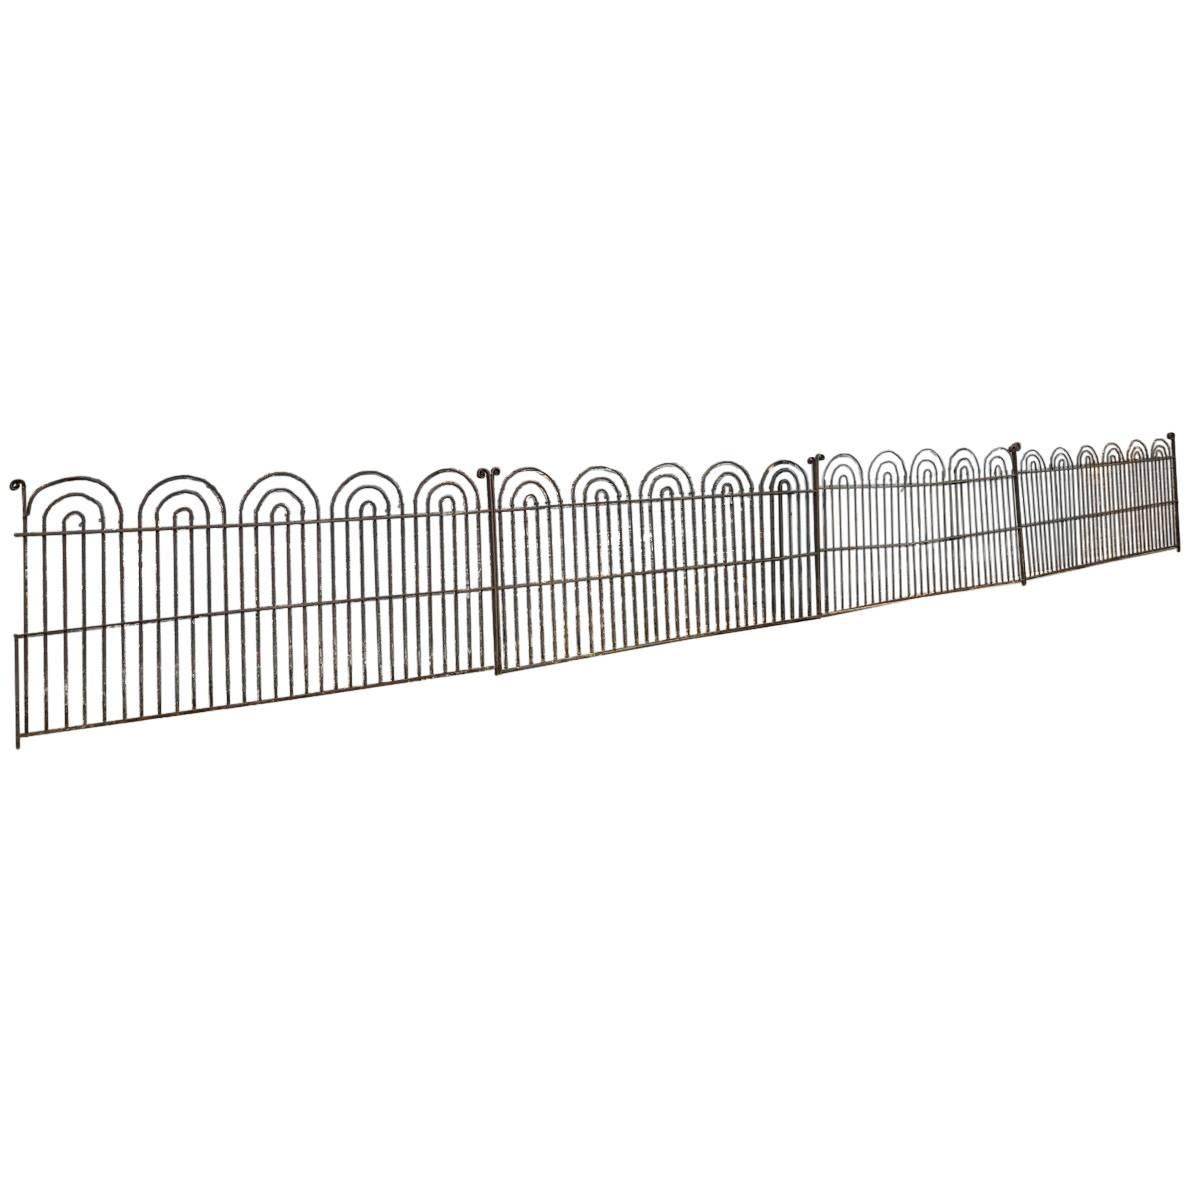 What is the difference between wrought iron and steel railings?